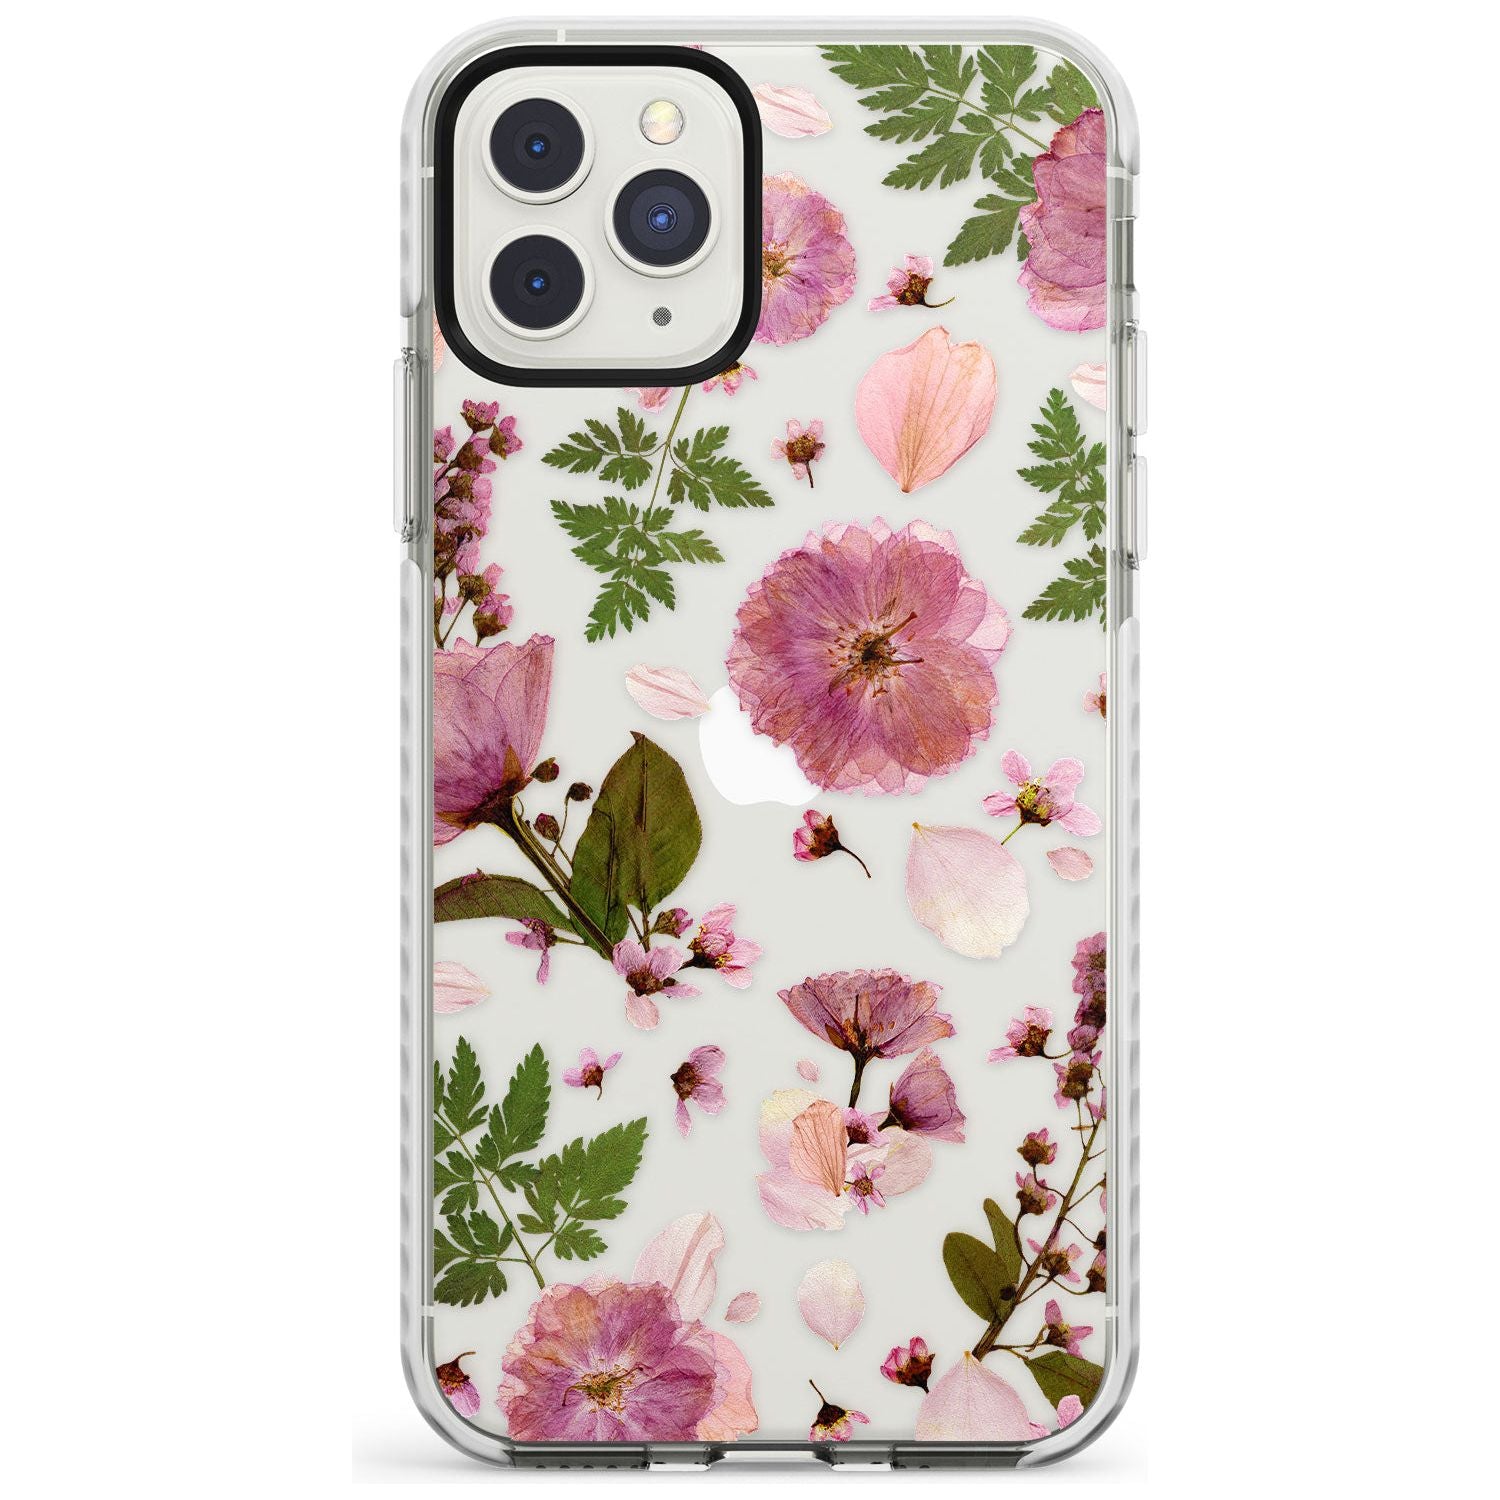 Natural Arrangement of Flowers & Leaves Design Impact Phone Case for iPhone 11 Pro Max